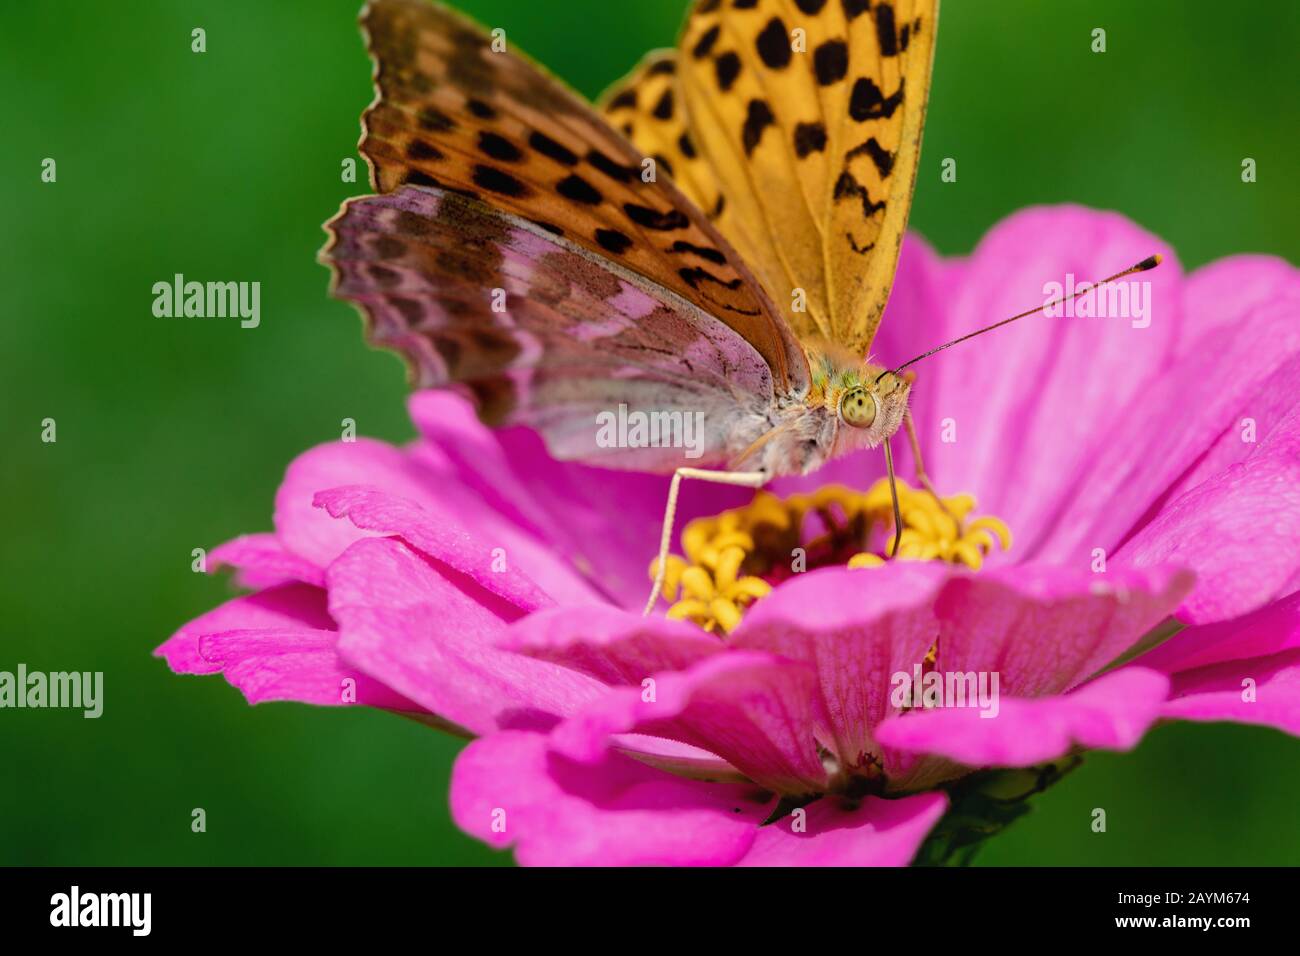 Closeup or Macro photo of Butterfly on Flower Stock Photo